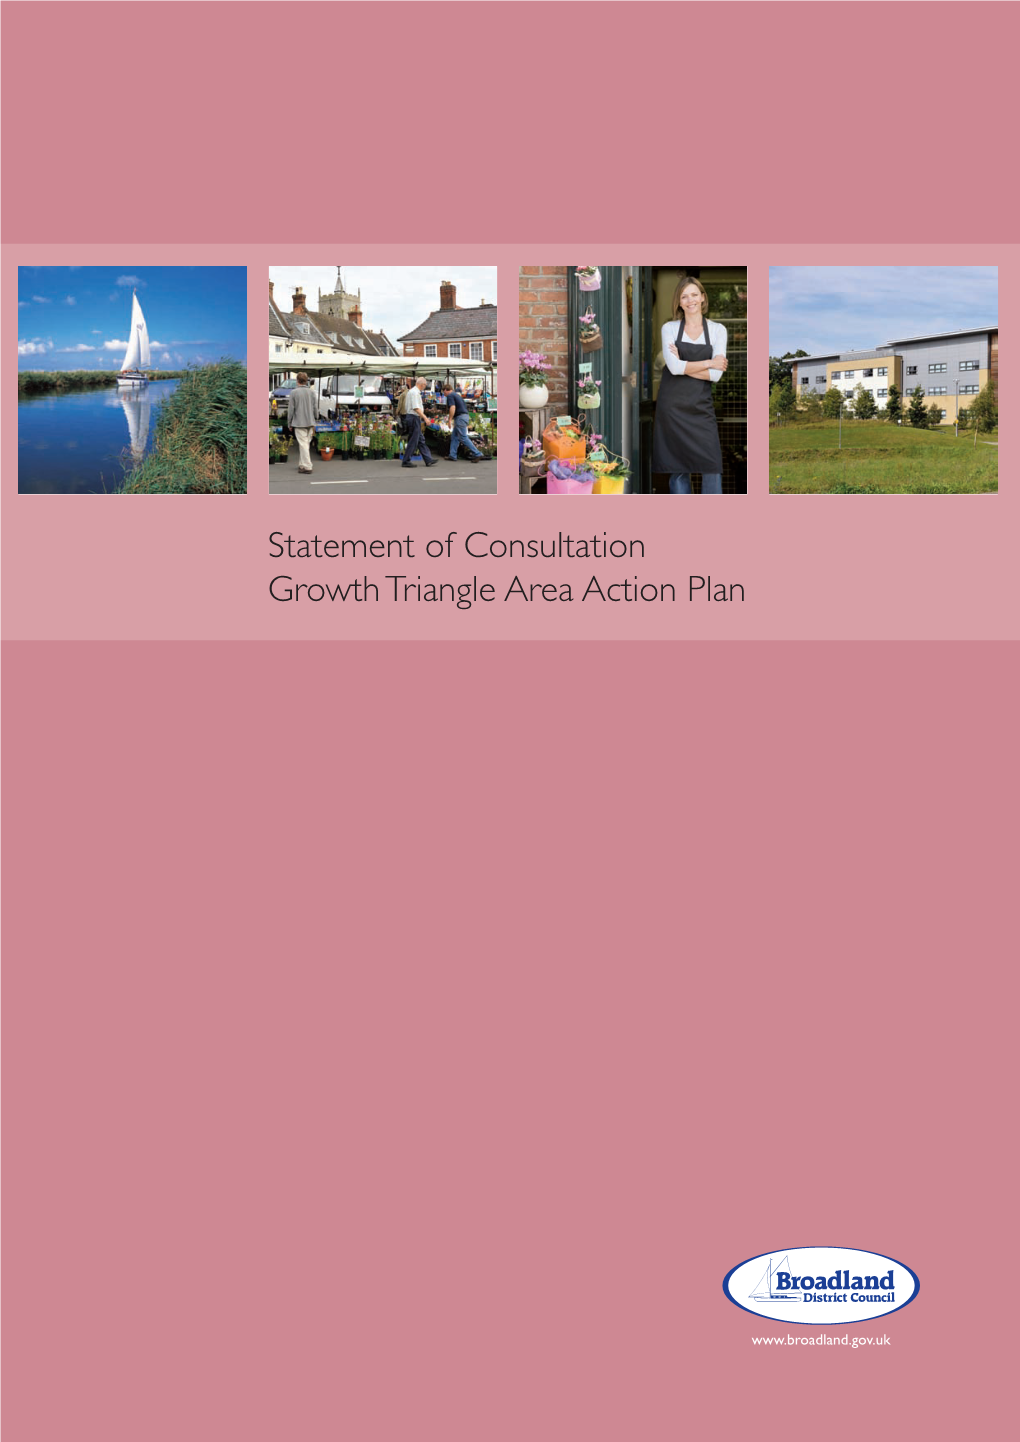 Growth Triangle Area Action Plan Area Action Plan - Statement of Consultation Contents